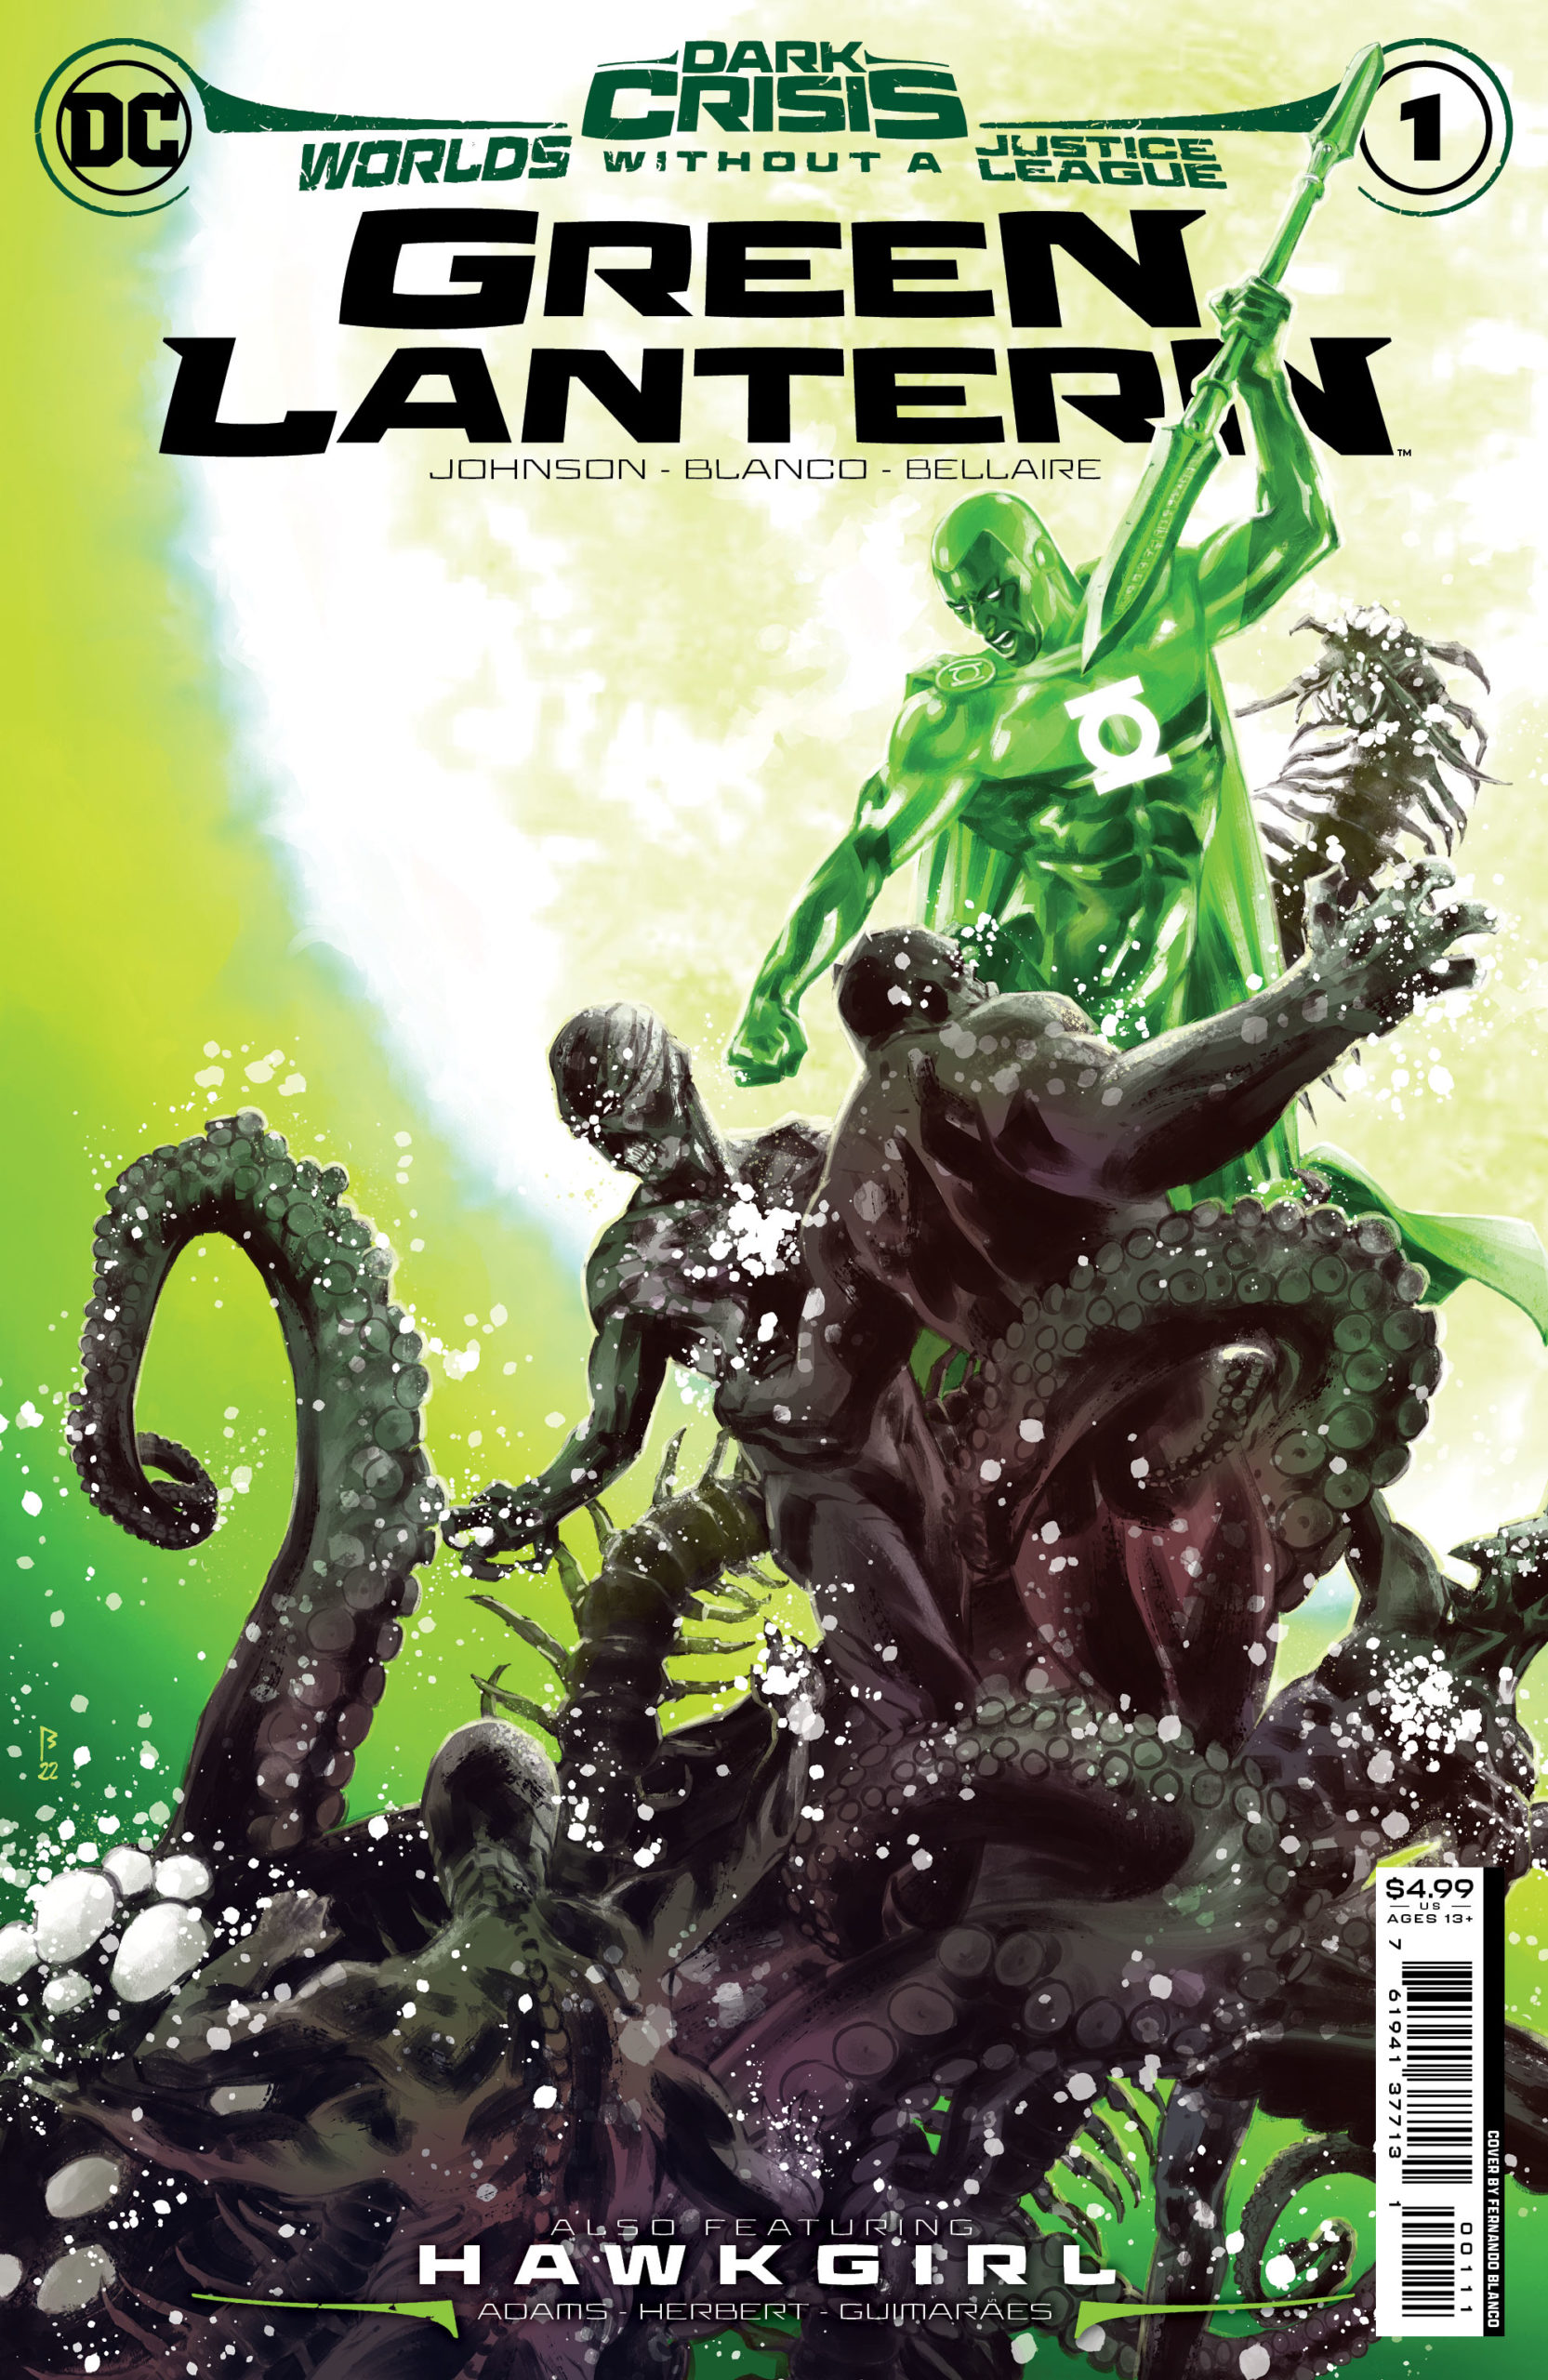 Dark Crisis World Without A Justice League Green Lantern #1